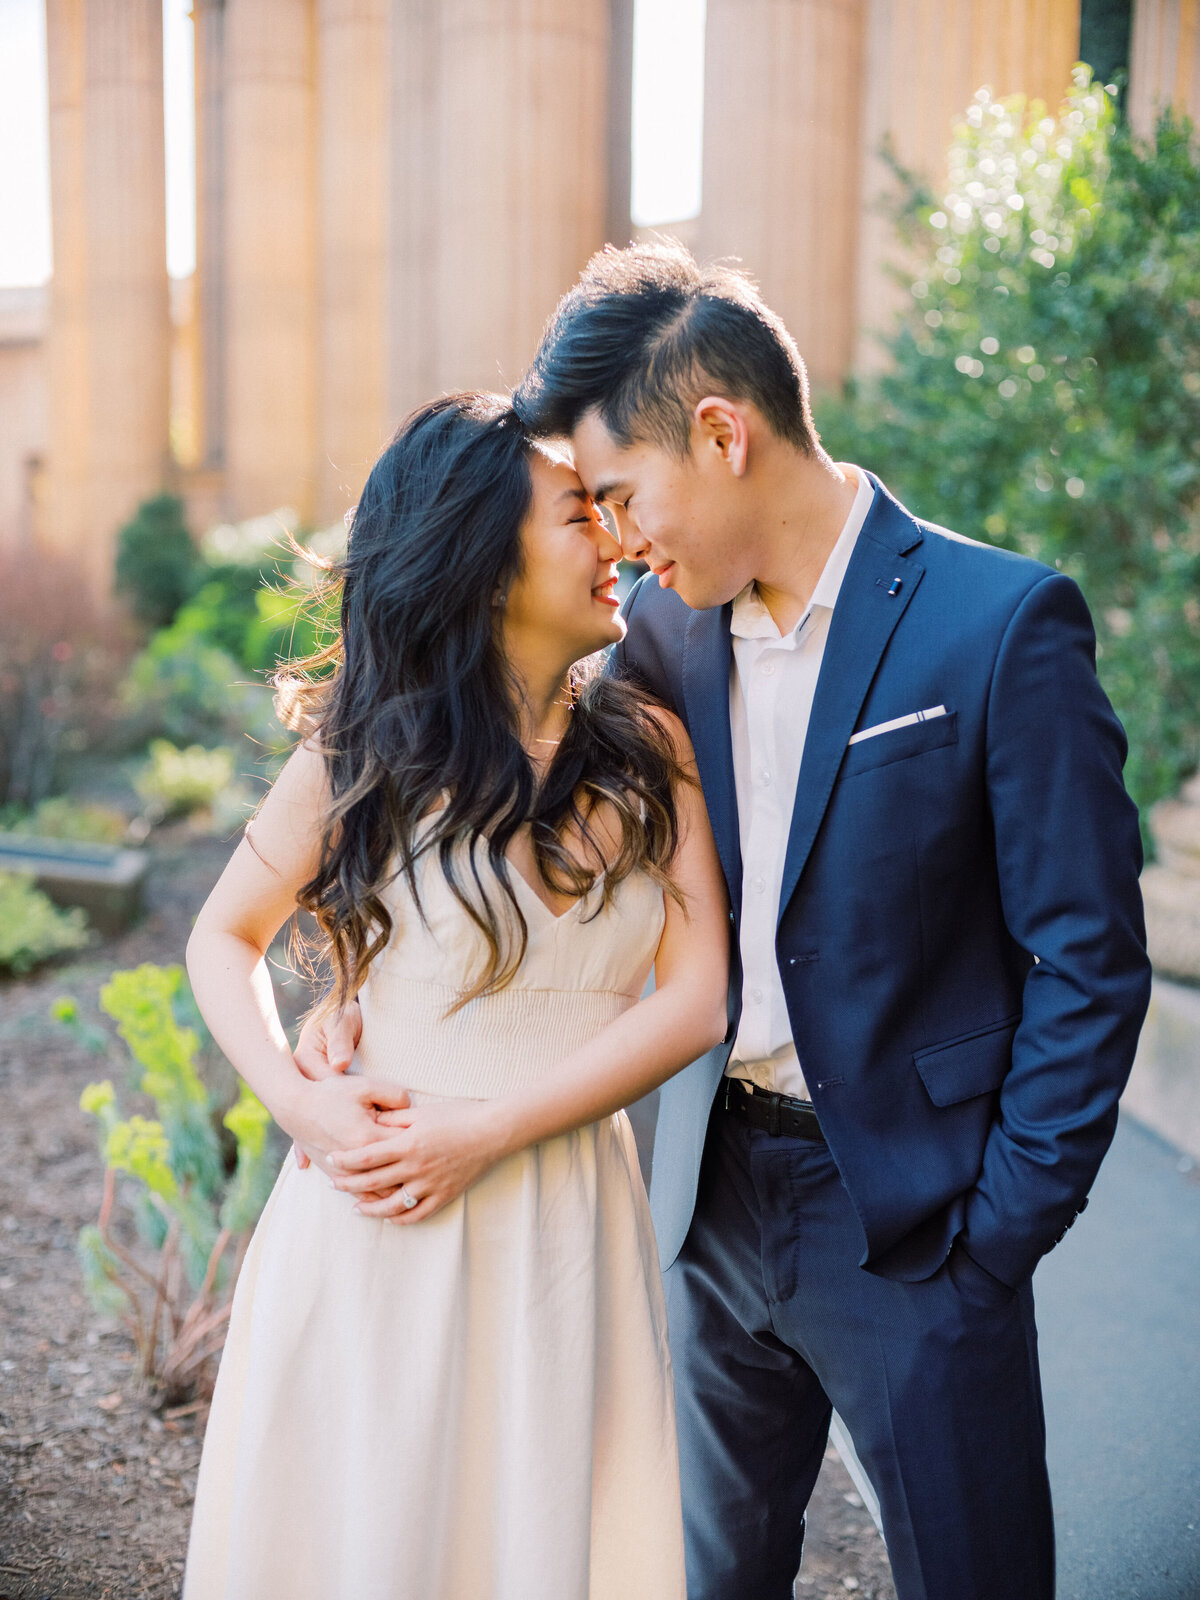 jessica-kevin-engagement-marshall-beach-palace-of-fine-arts-san-francisco-photography-19